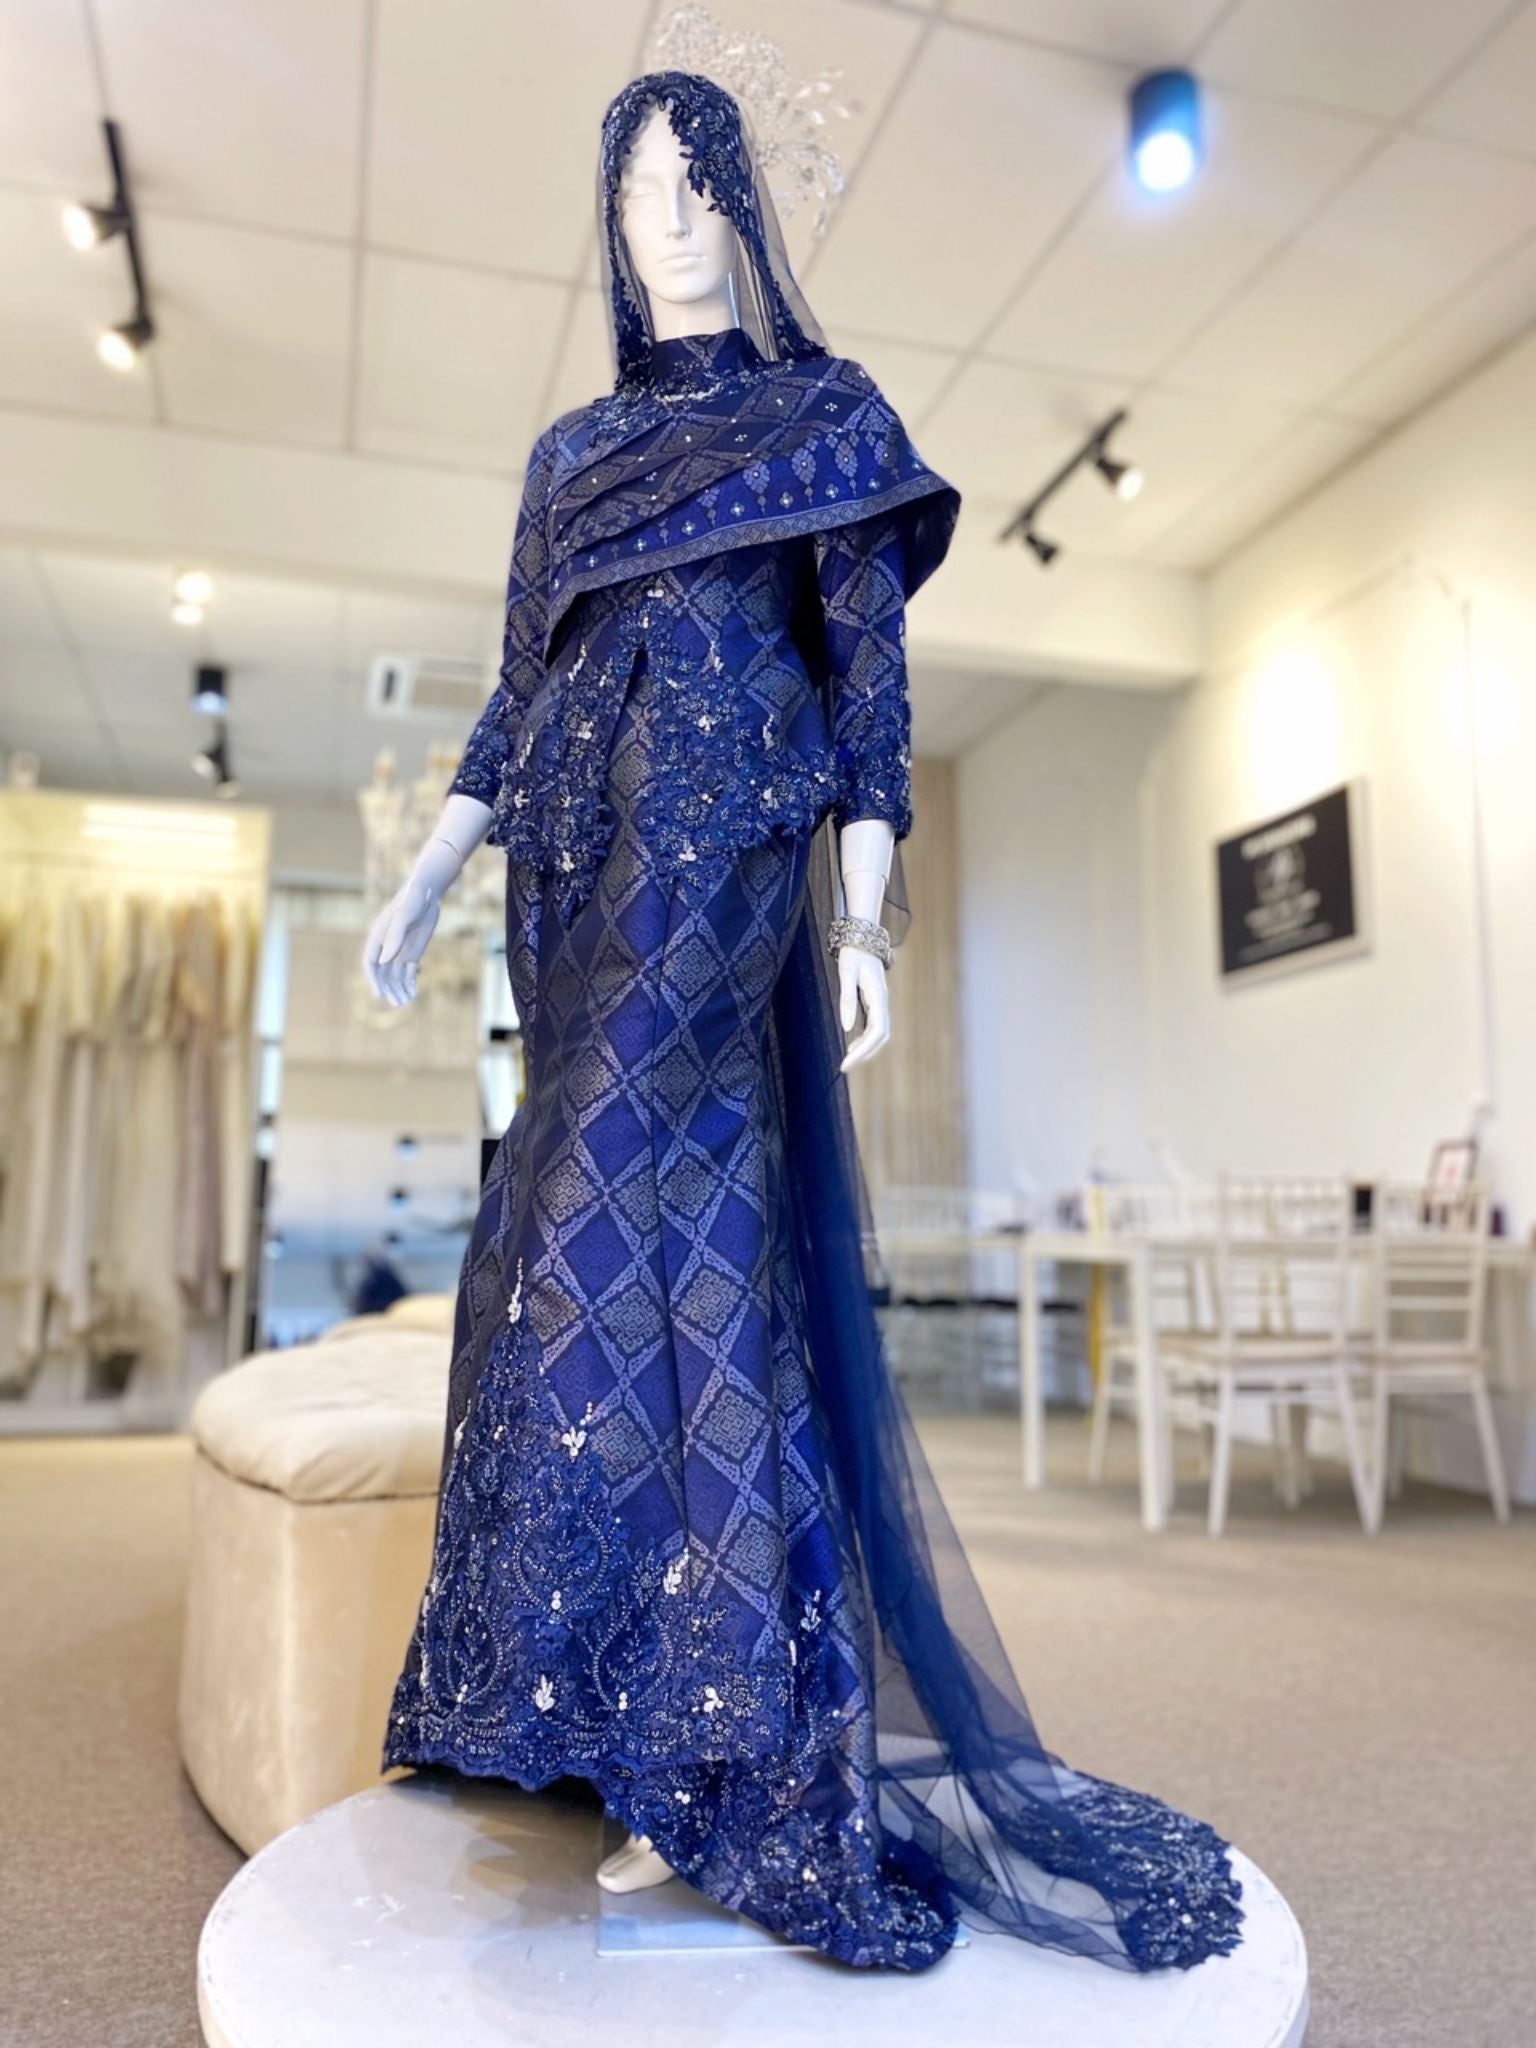 BETTY - Baju Pengantin Two-Piece Dress Navy Blue Songket with Beaded Lace Detailing. Modern and elegant baju pengantin with navy blue songket fabric, featuring delicate beaded lace detailing on the bodice. Perfect for a modern Malay wedding. Available for rent in Malaysia and Singapore.